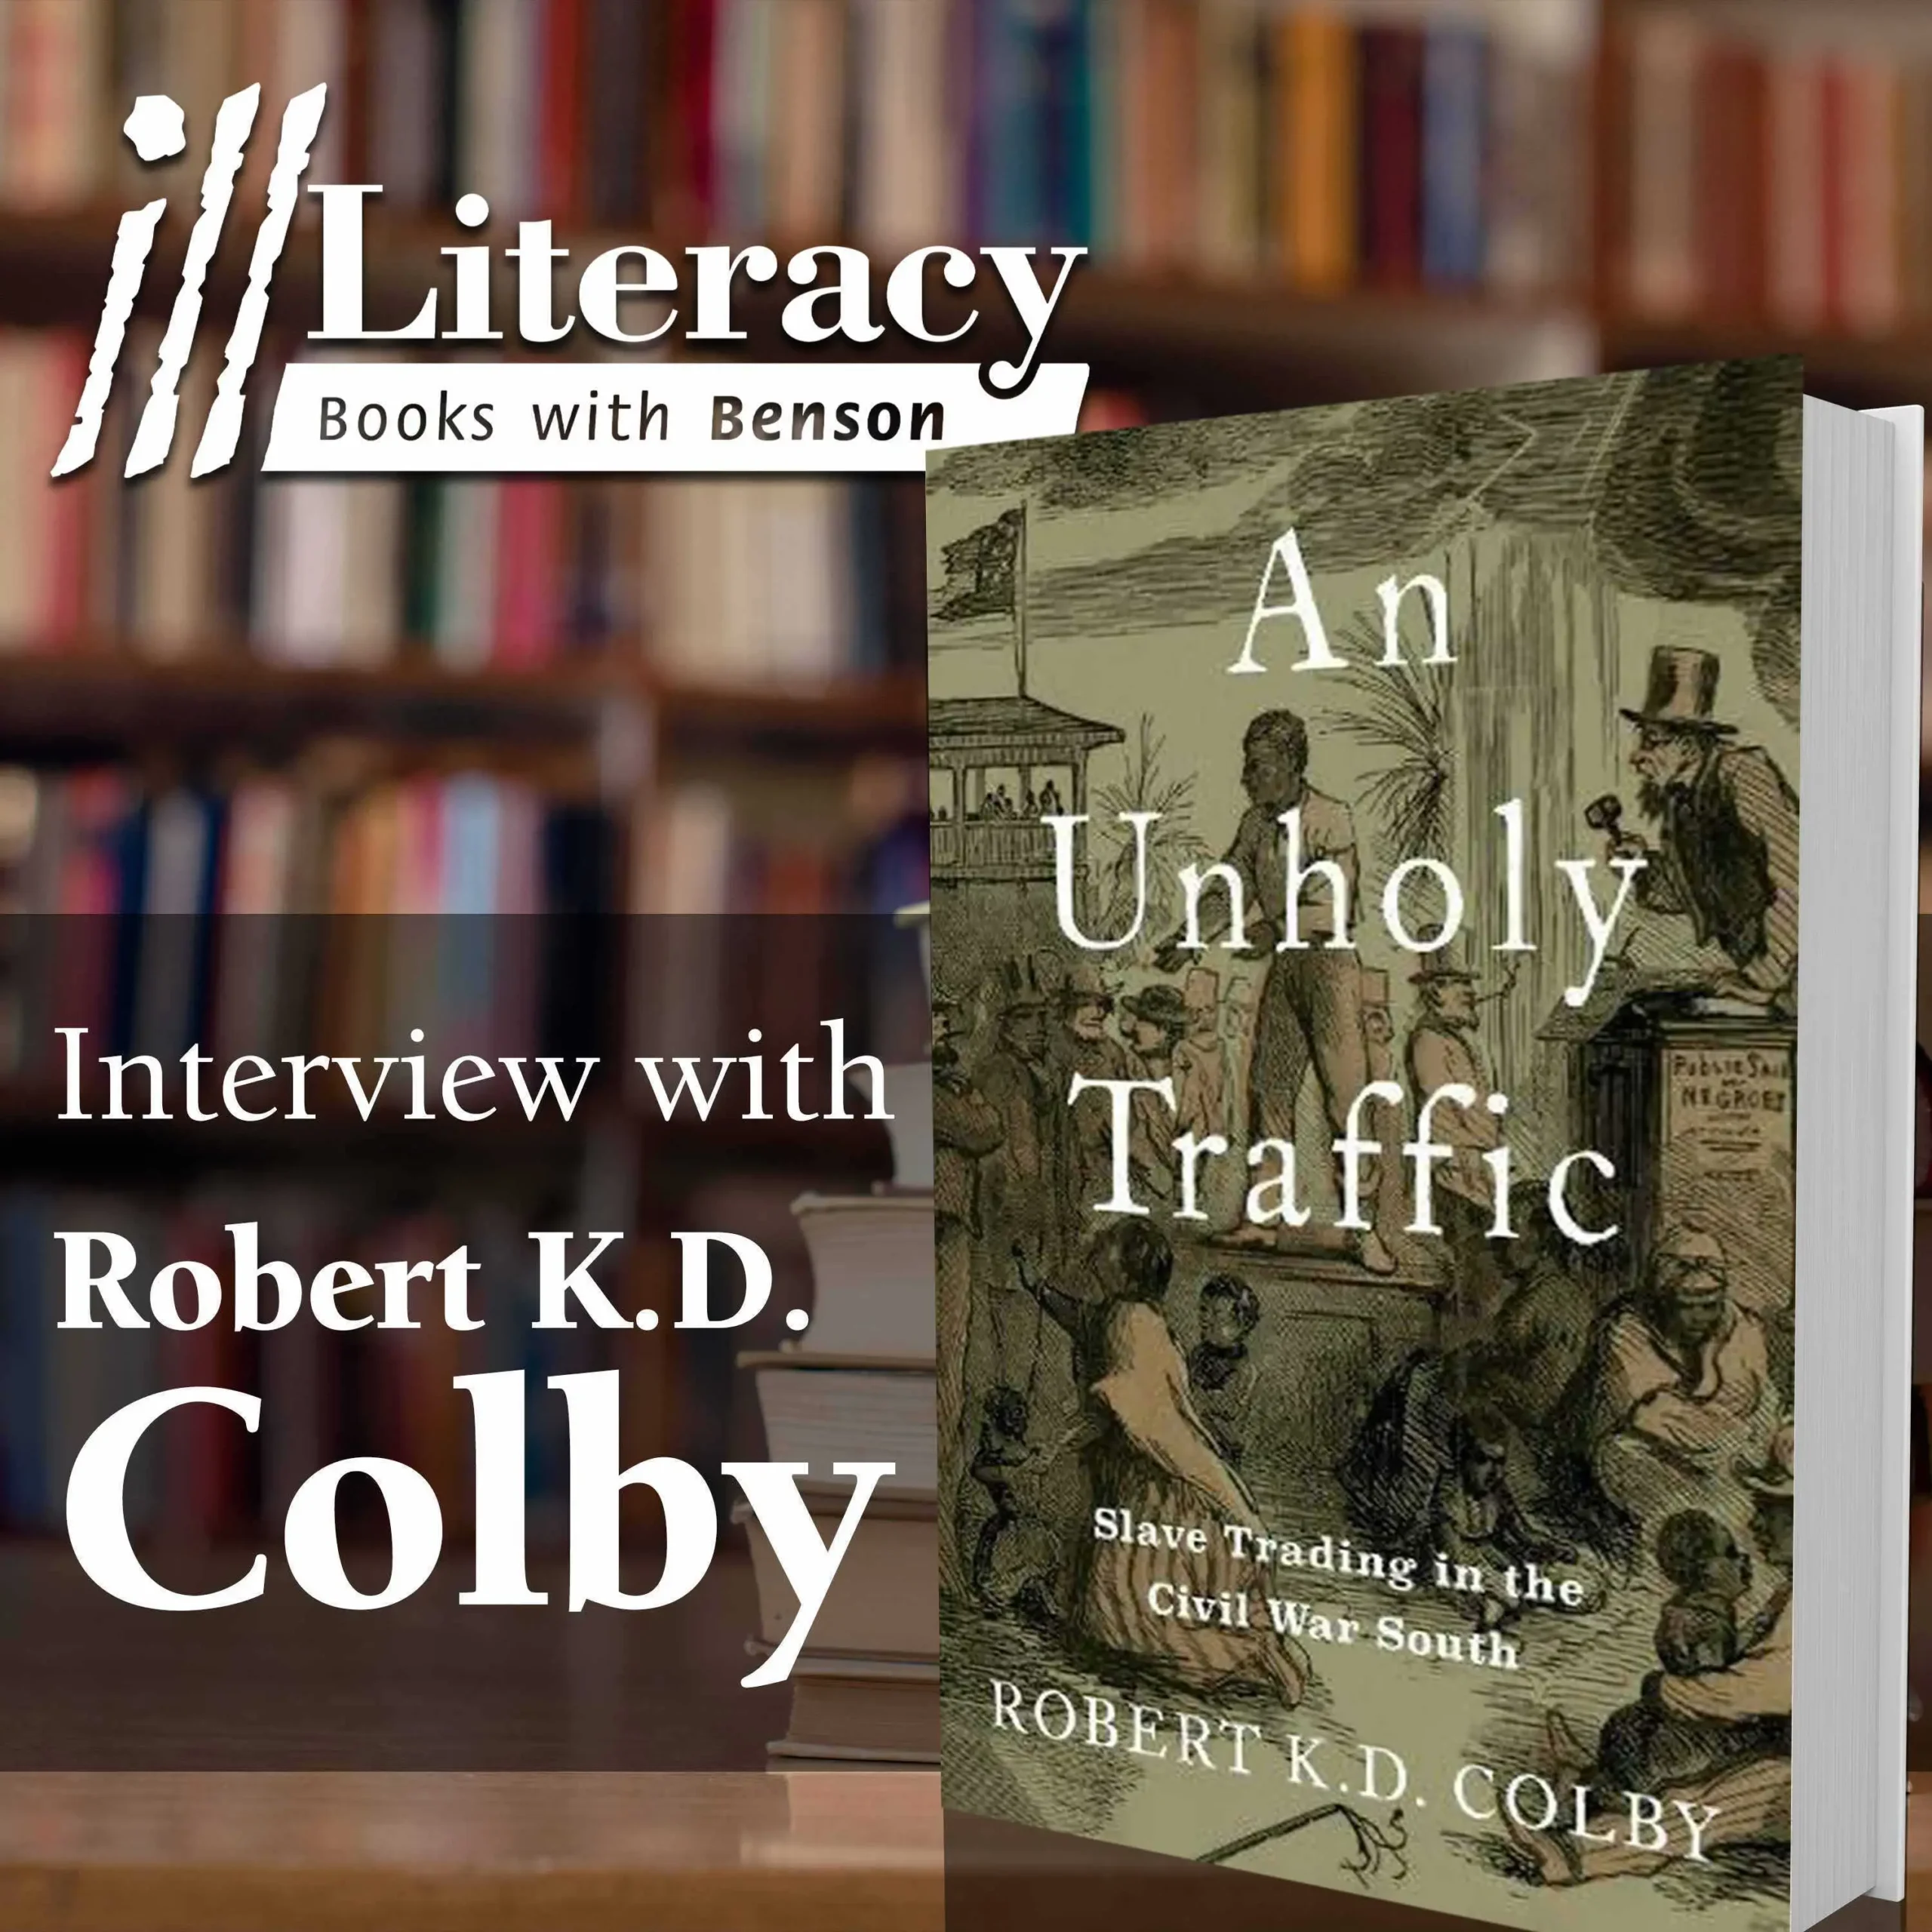 An Unholy Traffic: Slave Trading in the Civil War South (Guest: Robert K.D. Colby